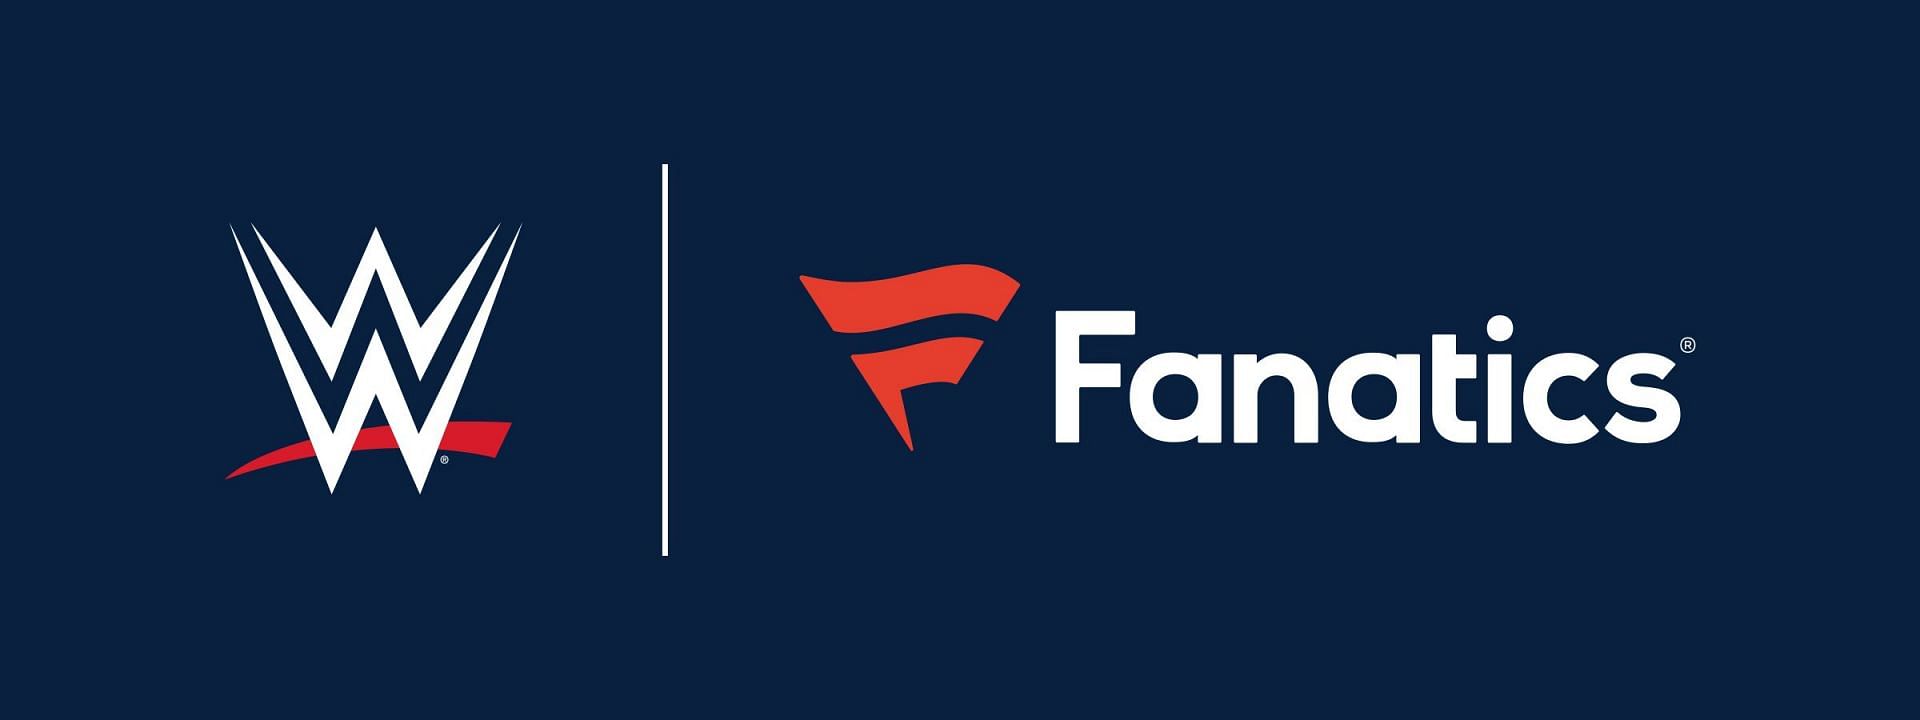 WWE and Fanatics announce new partnership that will include trading cards, e-commerce, and NFTs